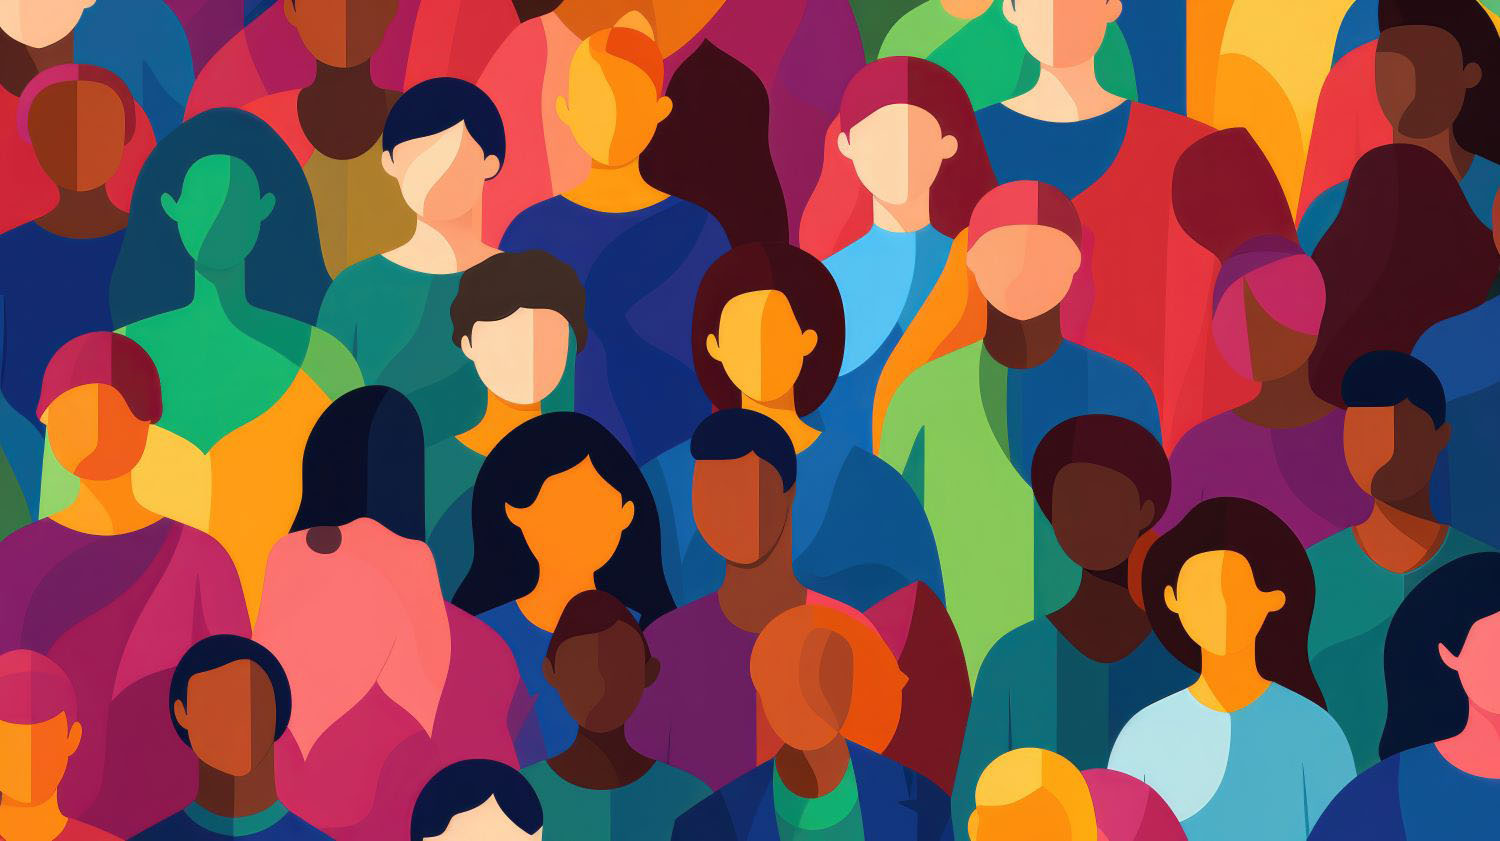 Inclusion and diversity concept expressed by an flat illustration of a colorful crowd of people.